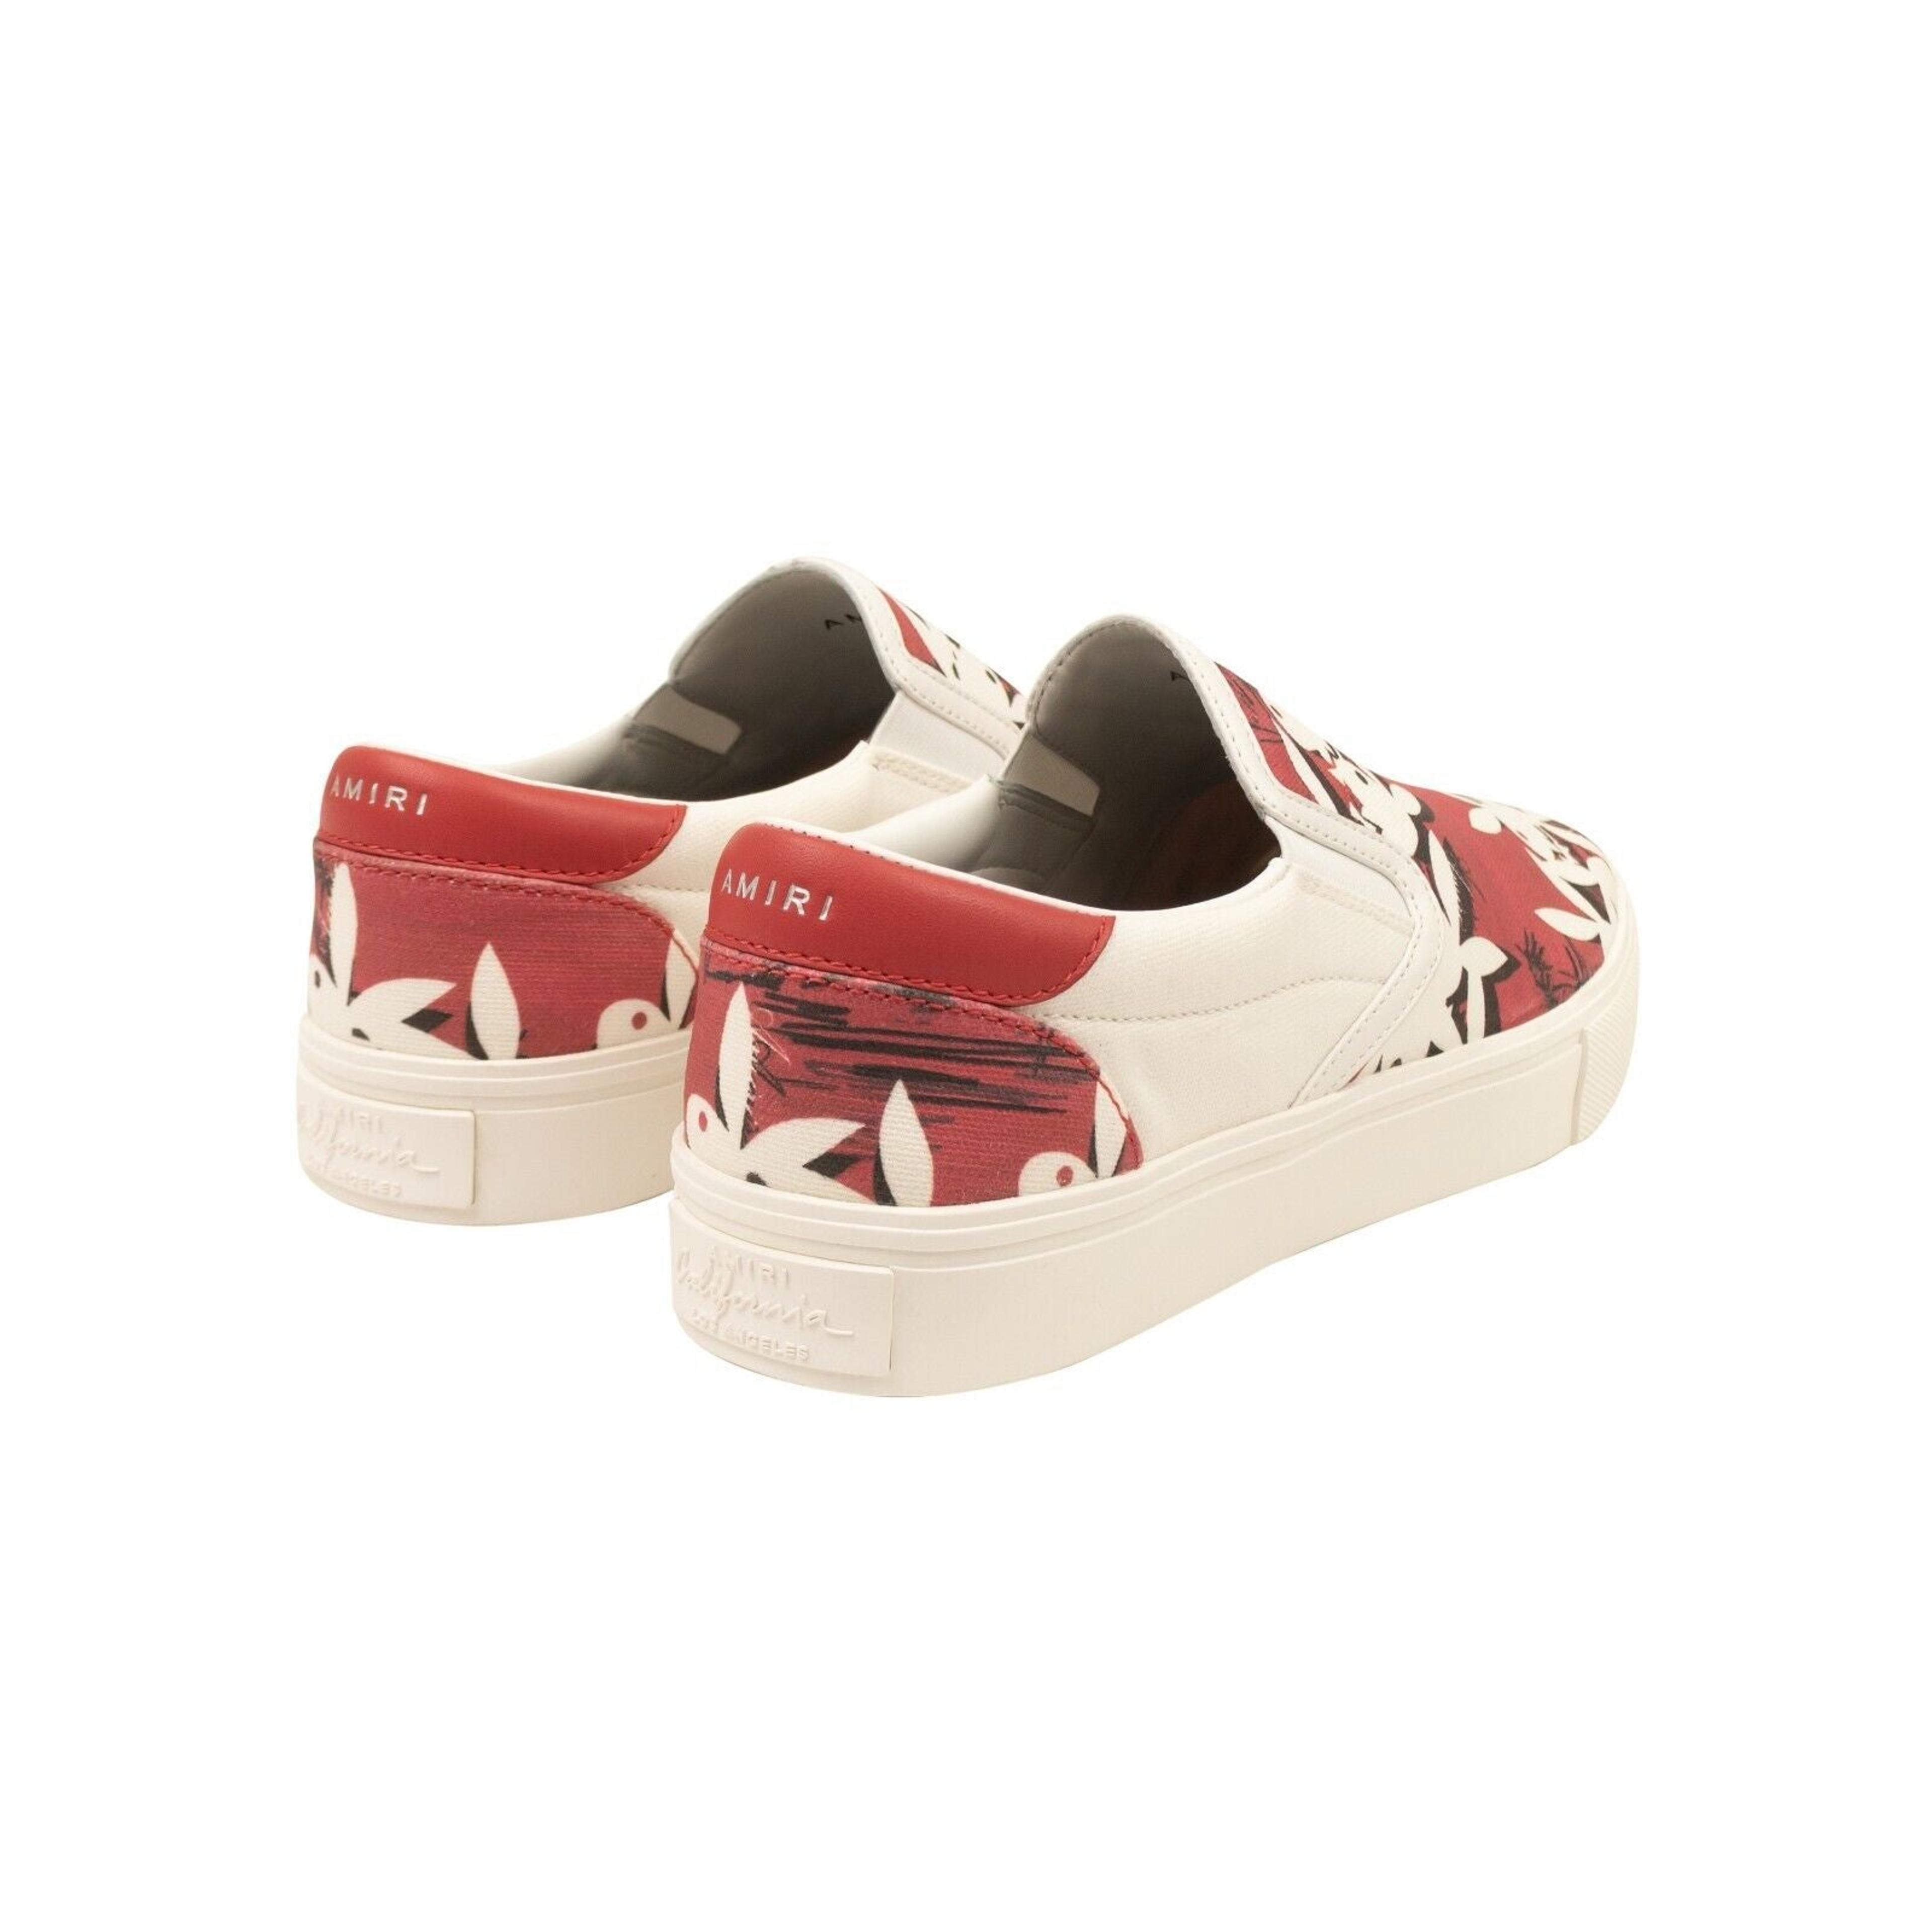 Alternate View 3 of Red And White Leather Playboy Slip On Sneakers